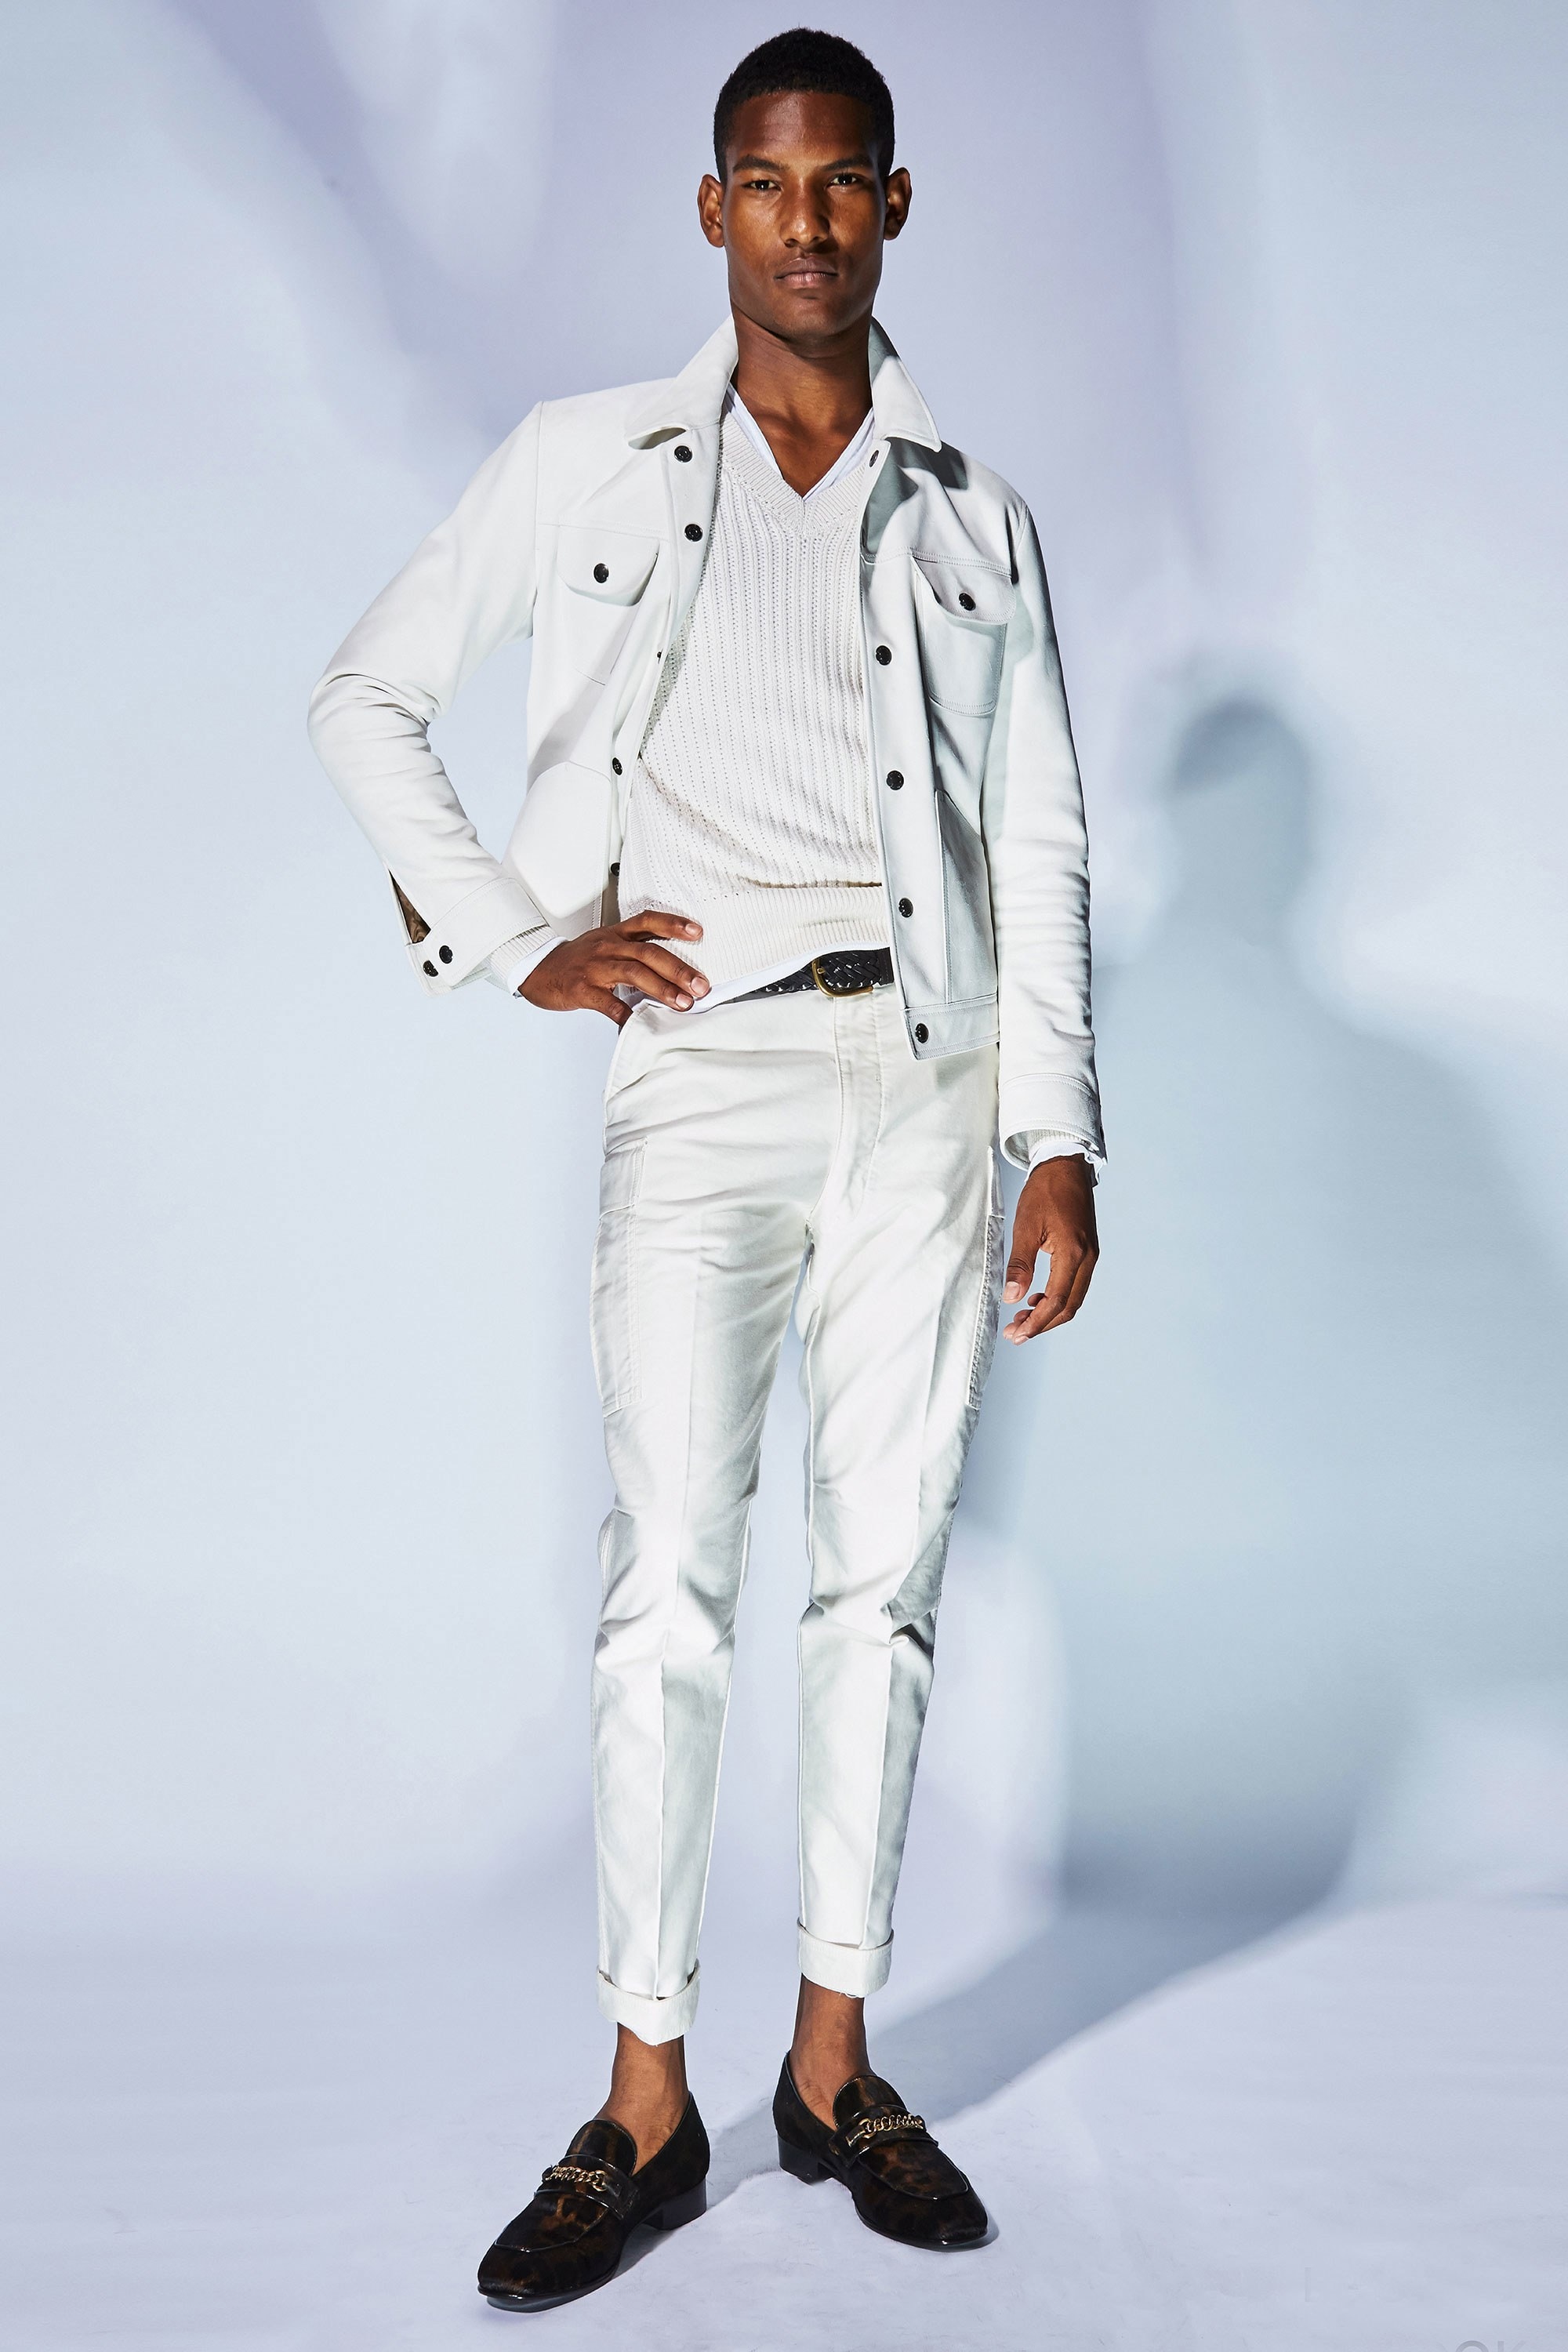 Tom Ford 2018 Spring/Summer Menswear Collection Lookbooks